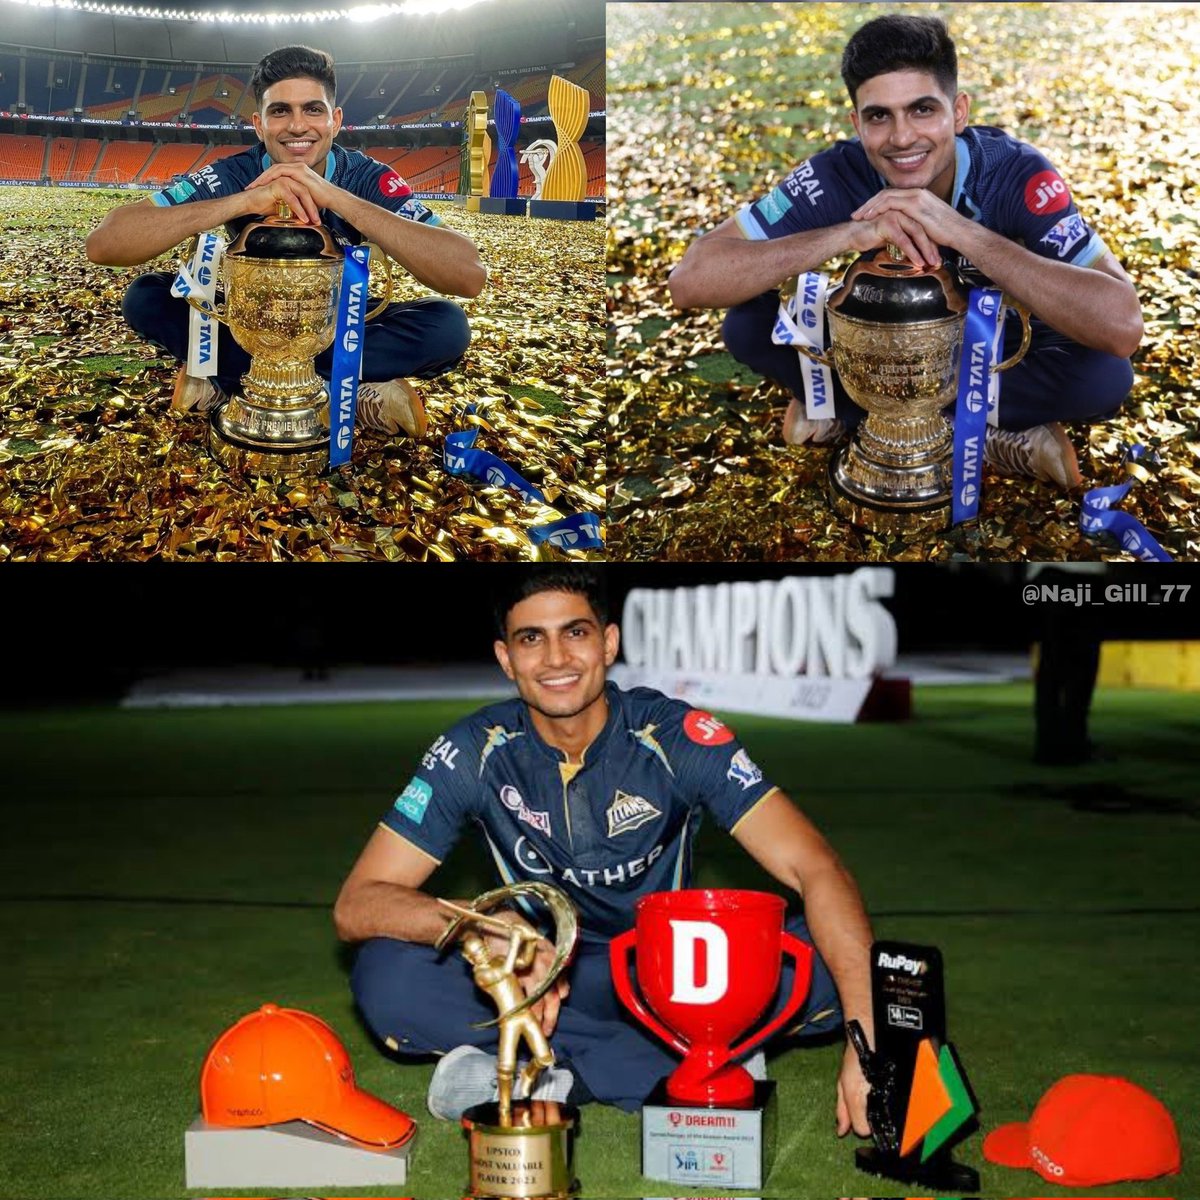 - 29 May 2022, 
Shubman Gill Won the IPL Trophy.

- 29 May 2023, 
Shubman Gill Won Orange Cap, MVP, Game changer & Most 4s Awards 

On this day in 2022 & 2023,
Prince Gill Created history in IPL